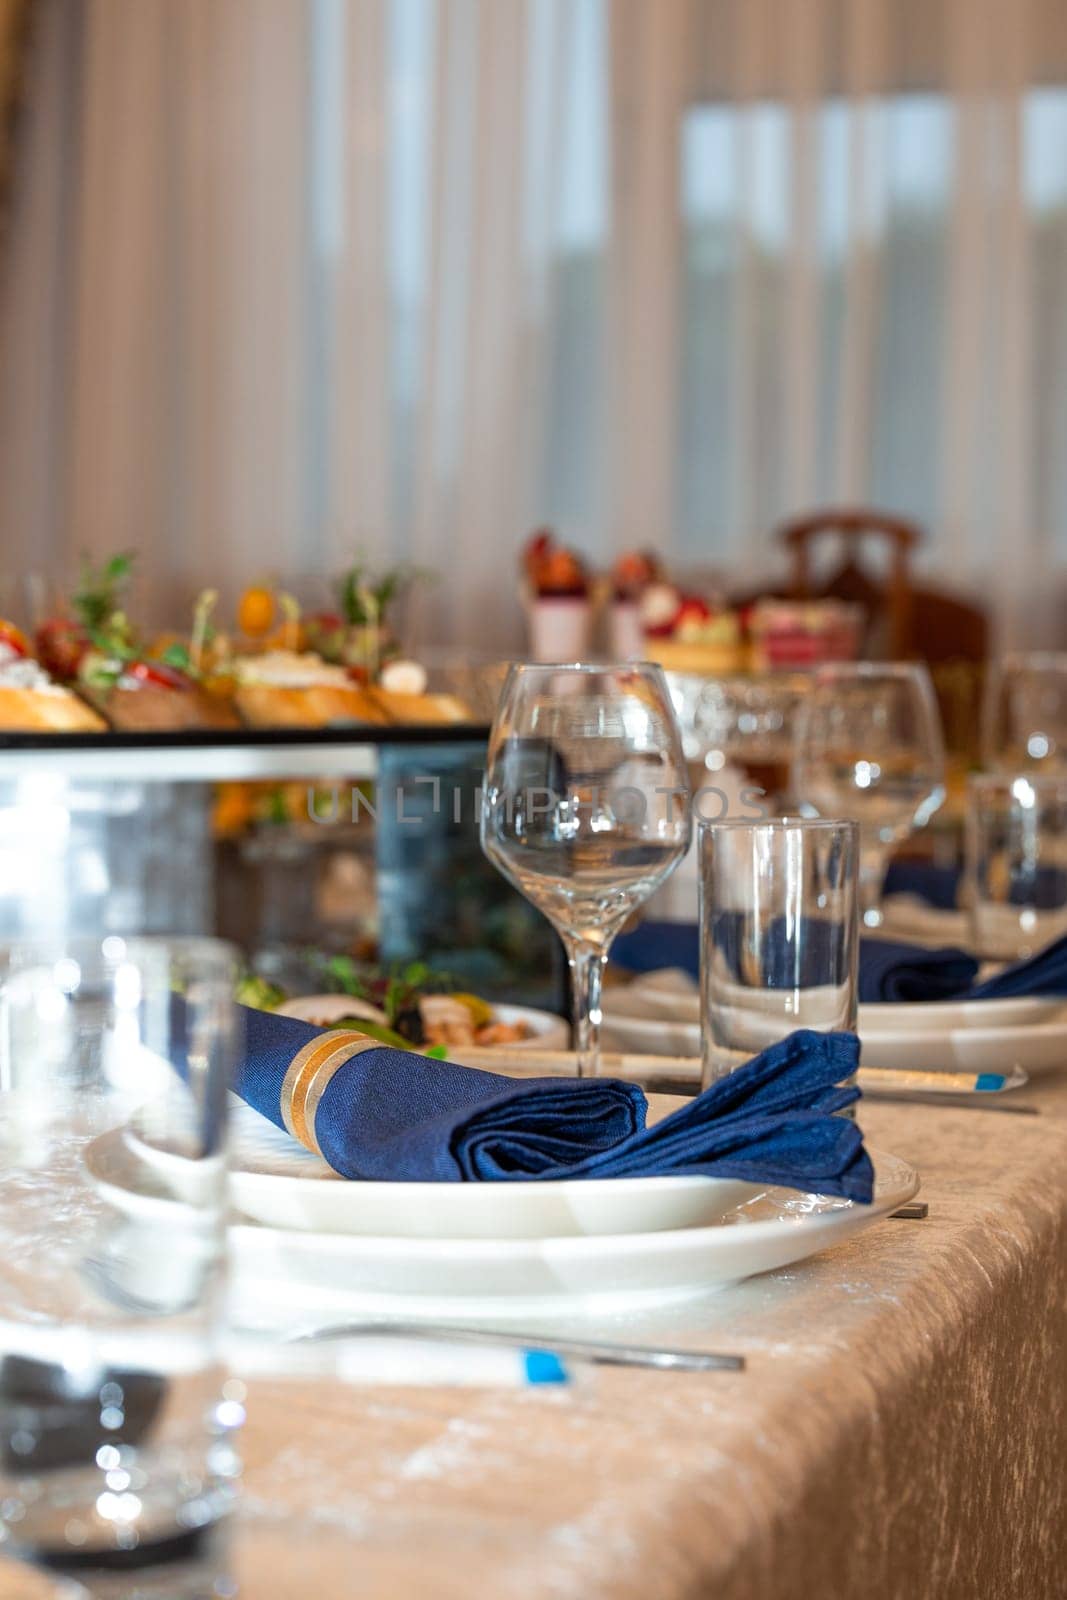 Elegant table setting with blue napkin and silverware by Pukhovskiy